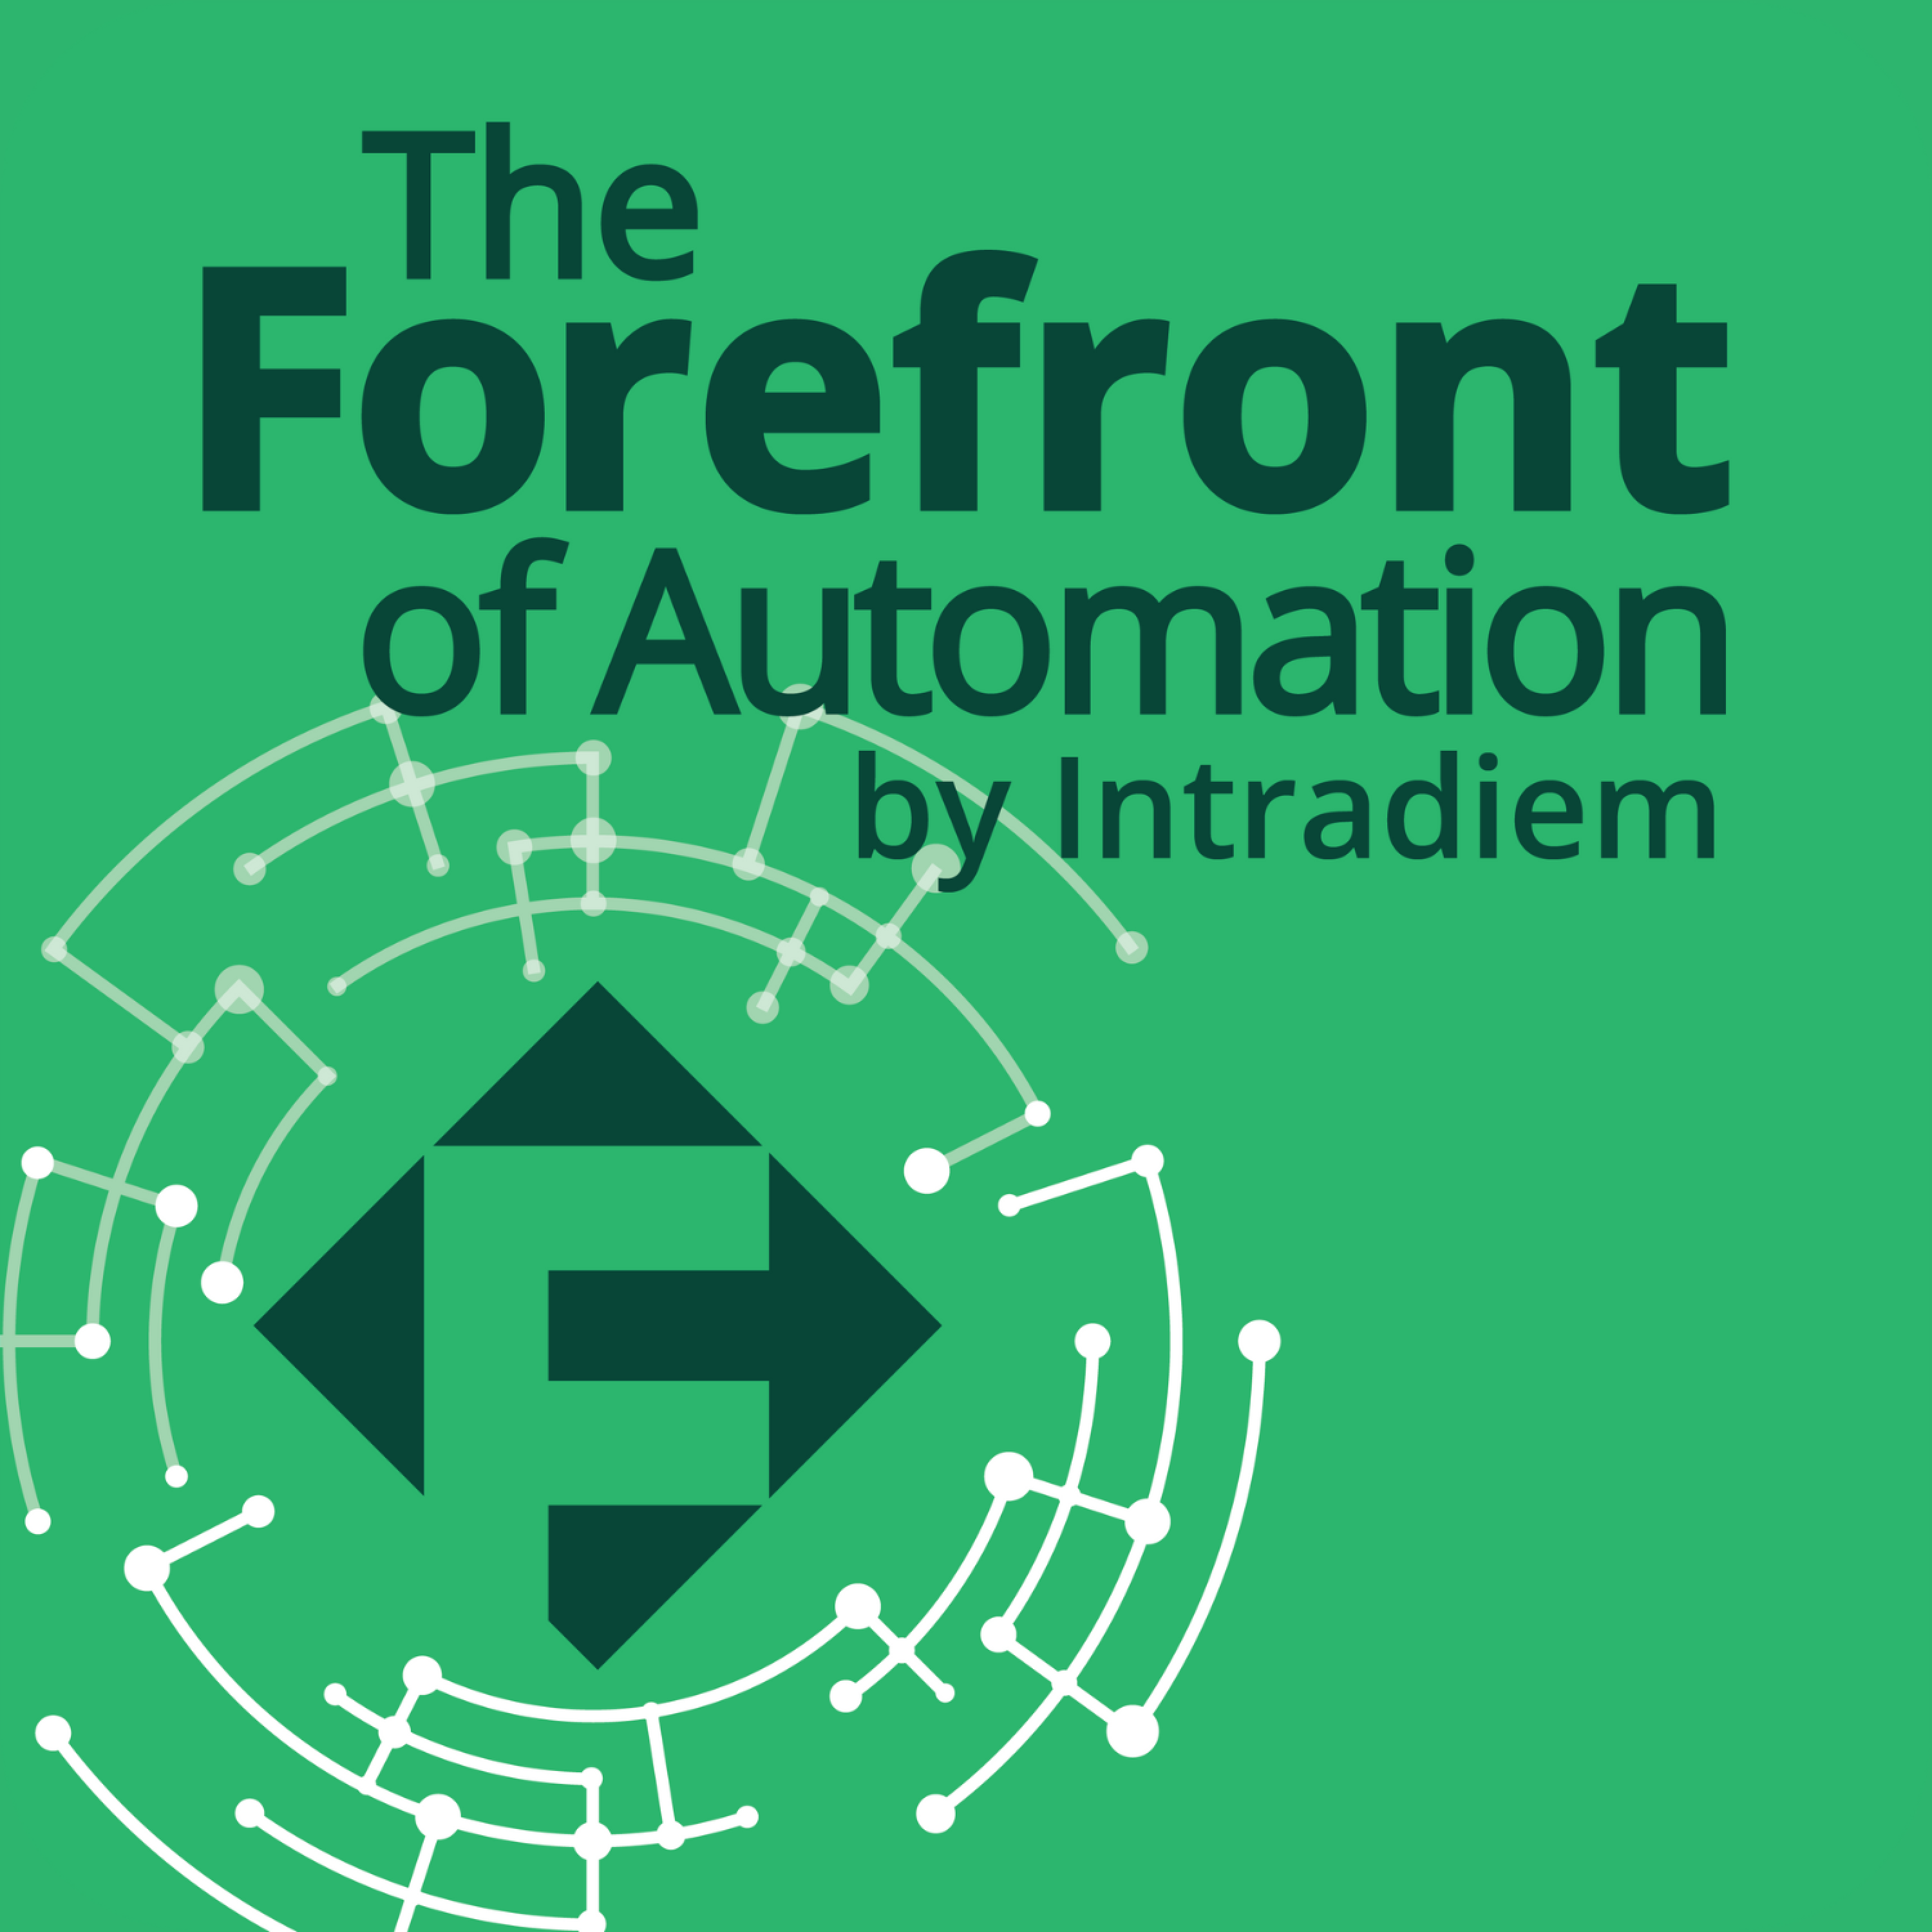 The Forefront of Automation (by Intradiem)